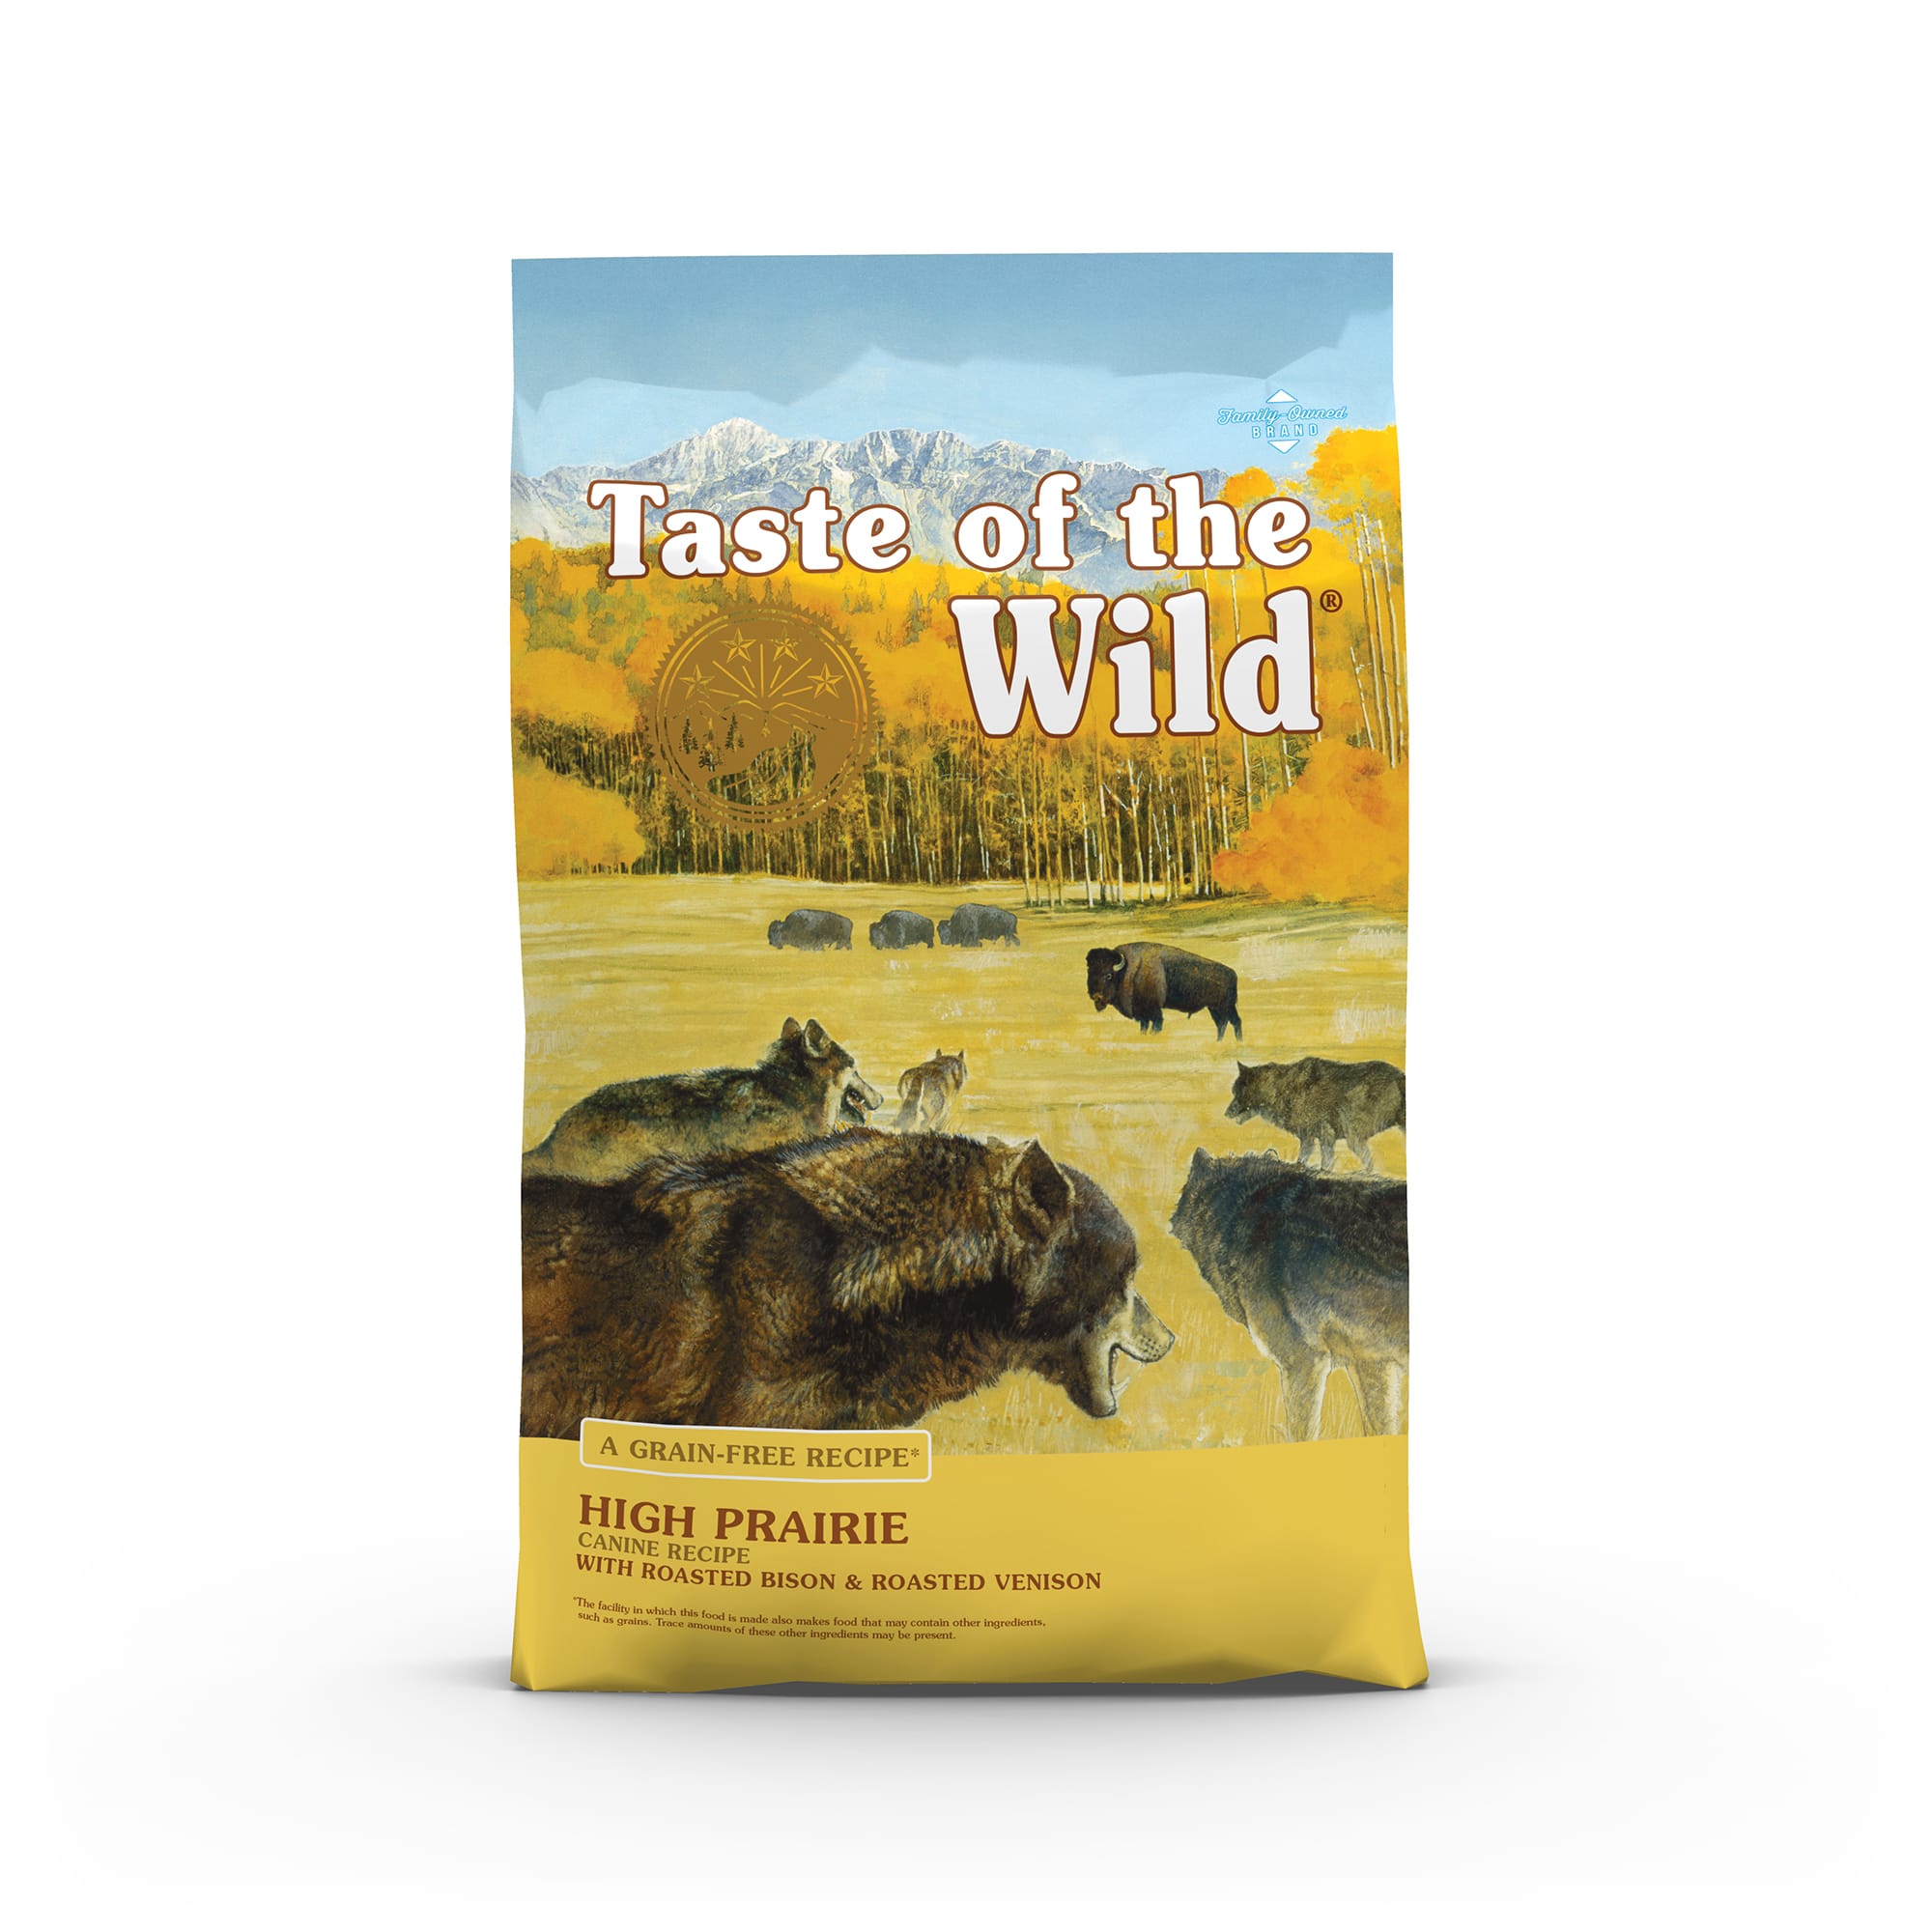 Taste Of The Wild High Prairie Grain Free Roasted Bison Venison Dry Dog Food 28 Lbs Petco There is also, the prey recipe line, which is a limited ingredient formula. taste of the wild high prairie grain free roasted bison venison dry dog food 28 lbs